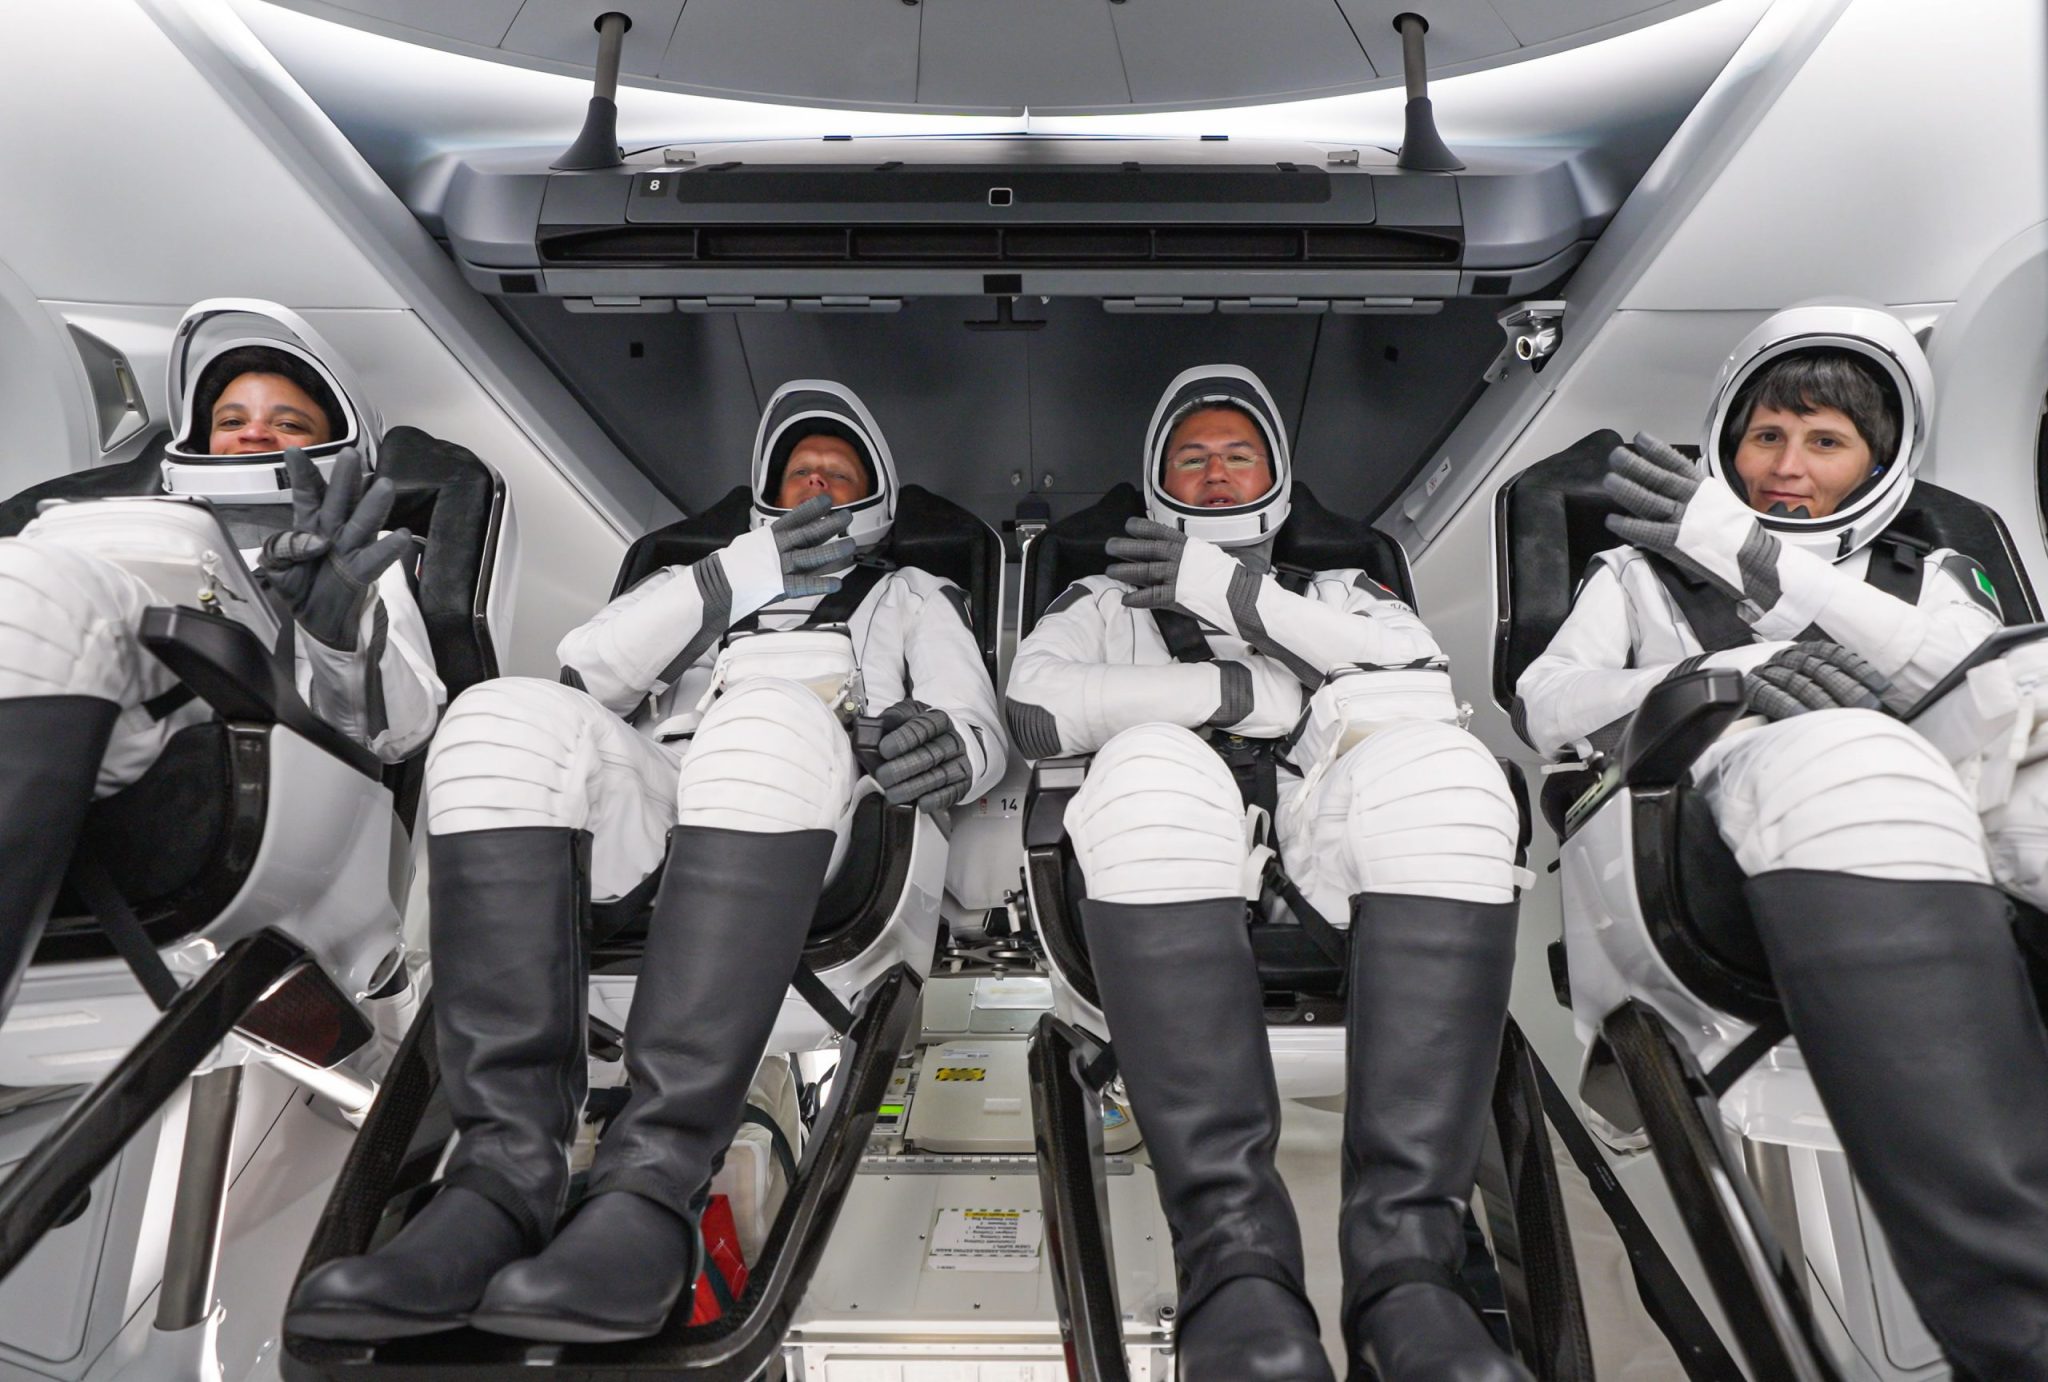 The SpaceX Crew-4 astronauts are seated inside the Dragon Freedom crew ship before their launch atop the Falcon 9 rocket.